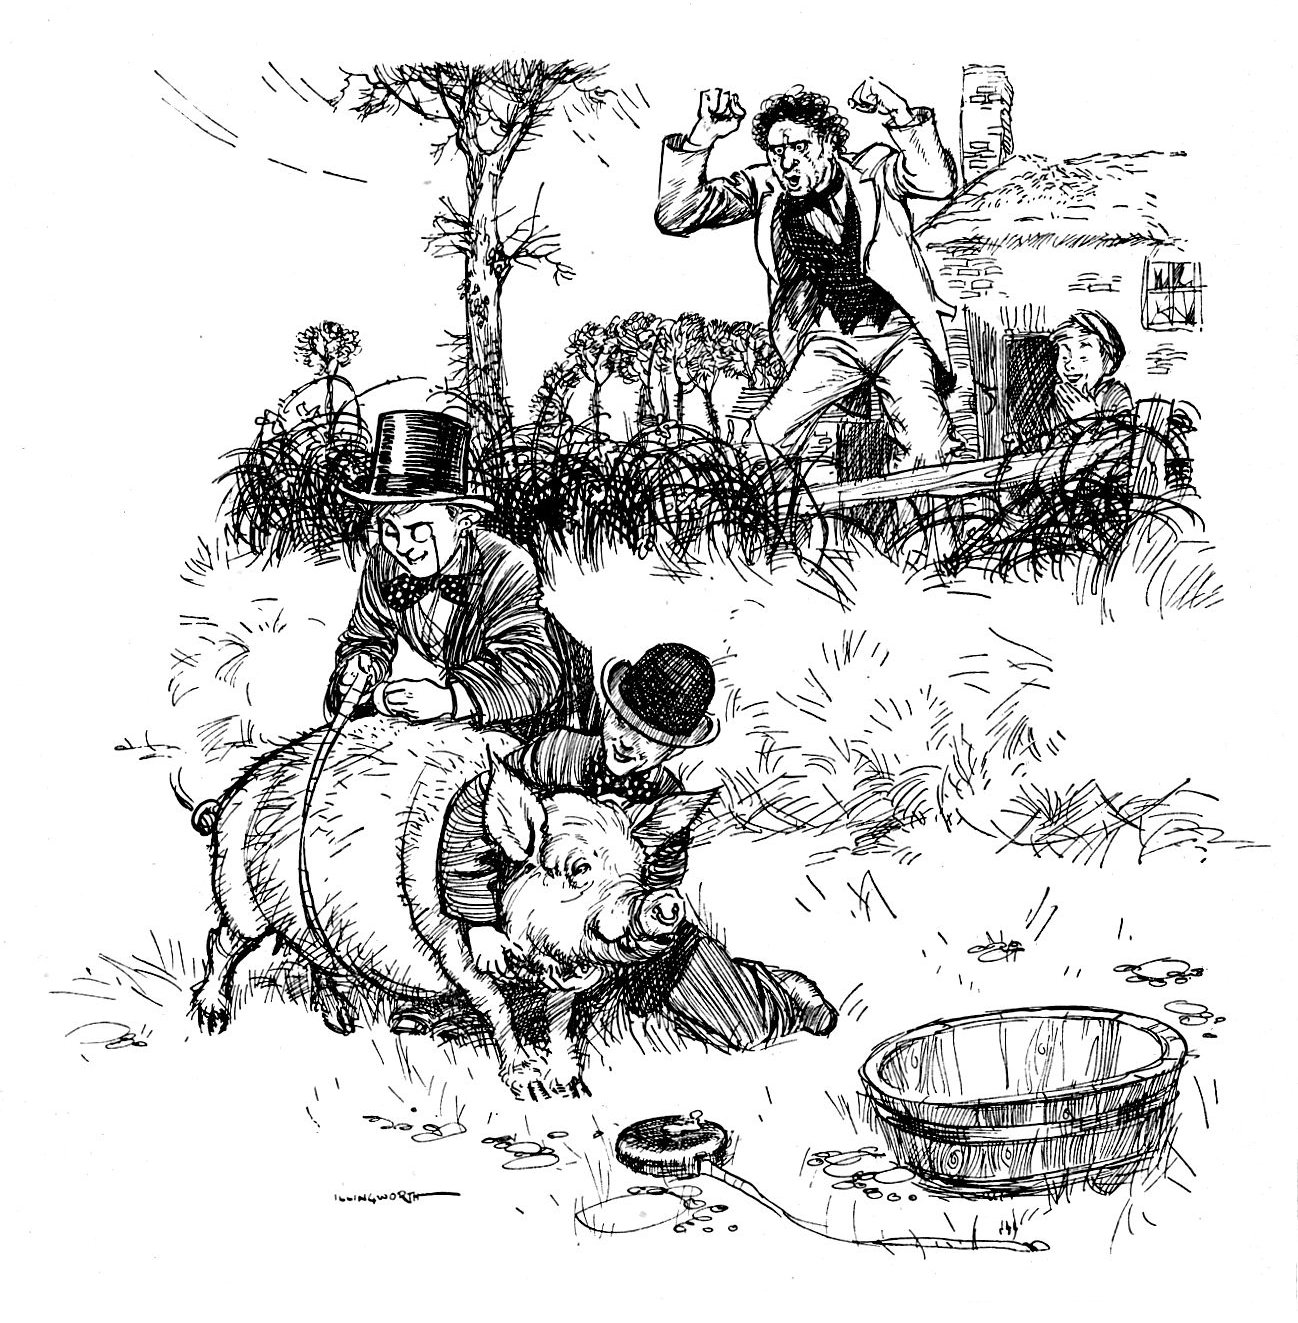 A man shakes his fist at two boys with a pig.